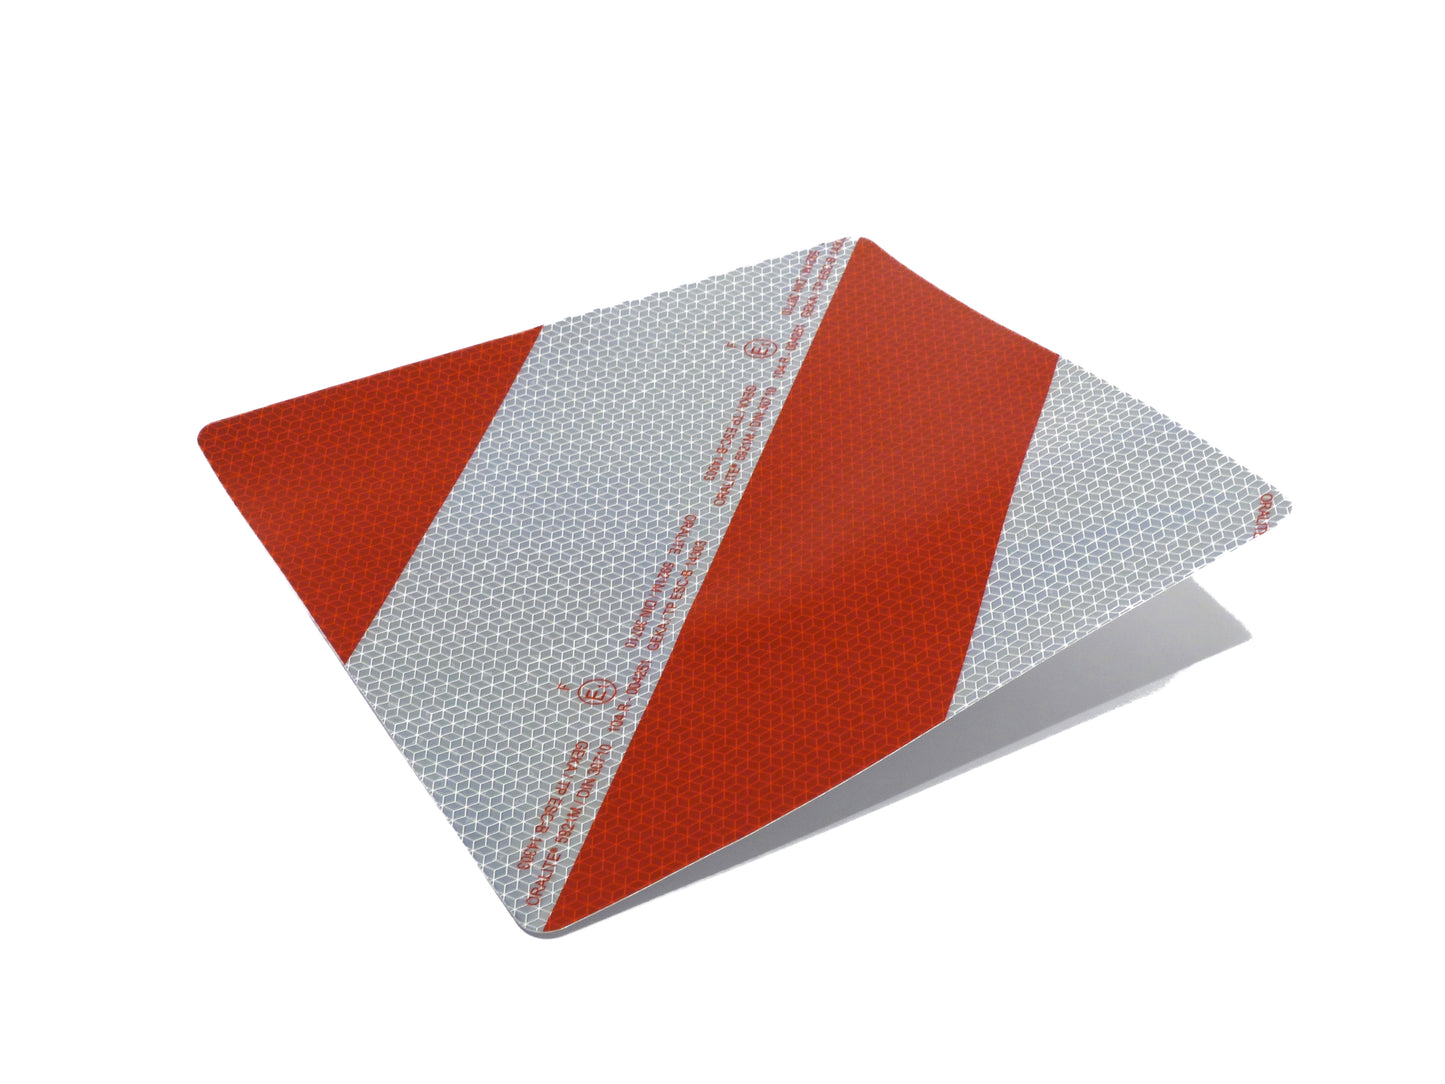 Reflective foil self adhesive 282mm left + pointing right